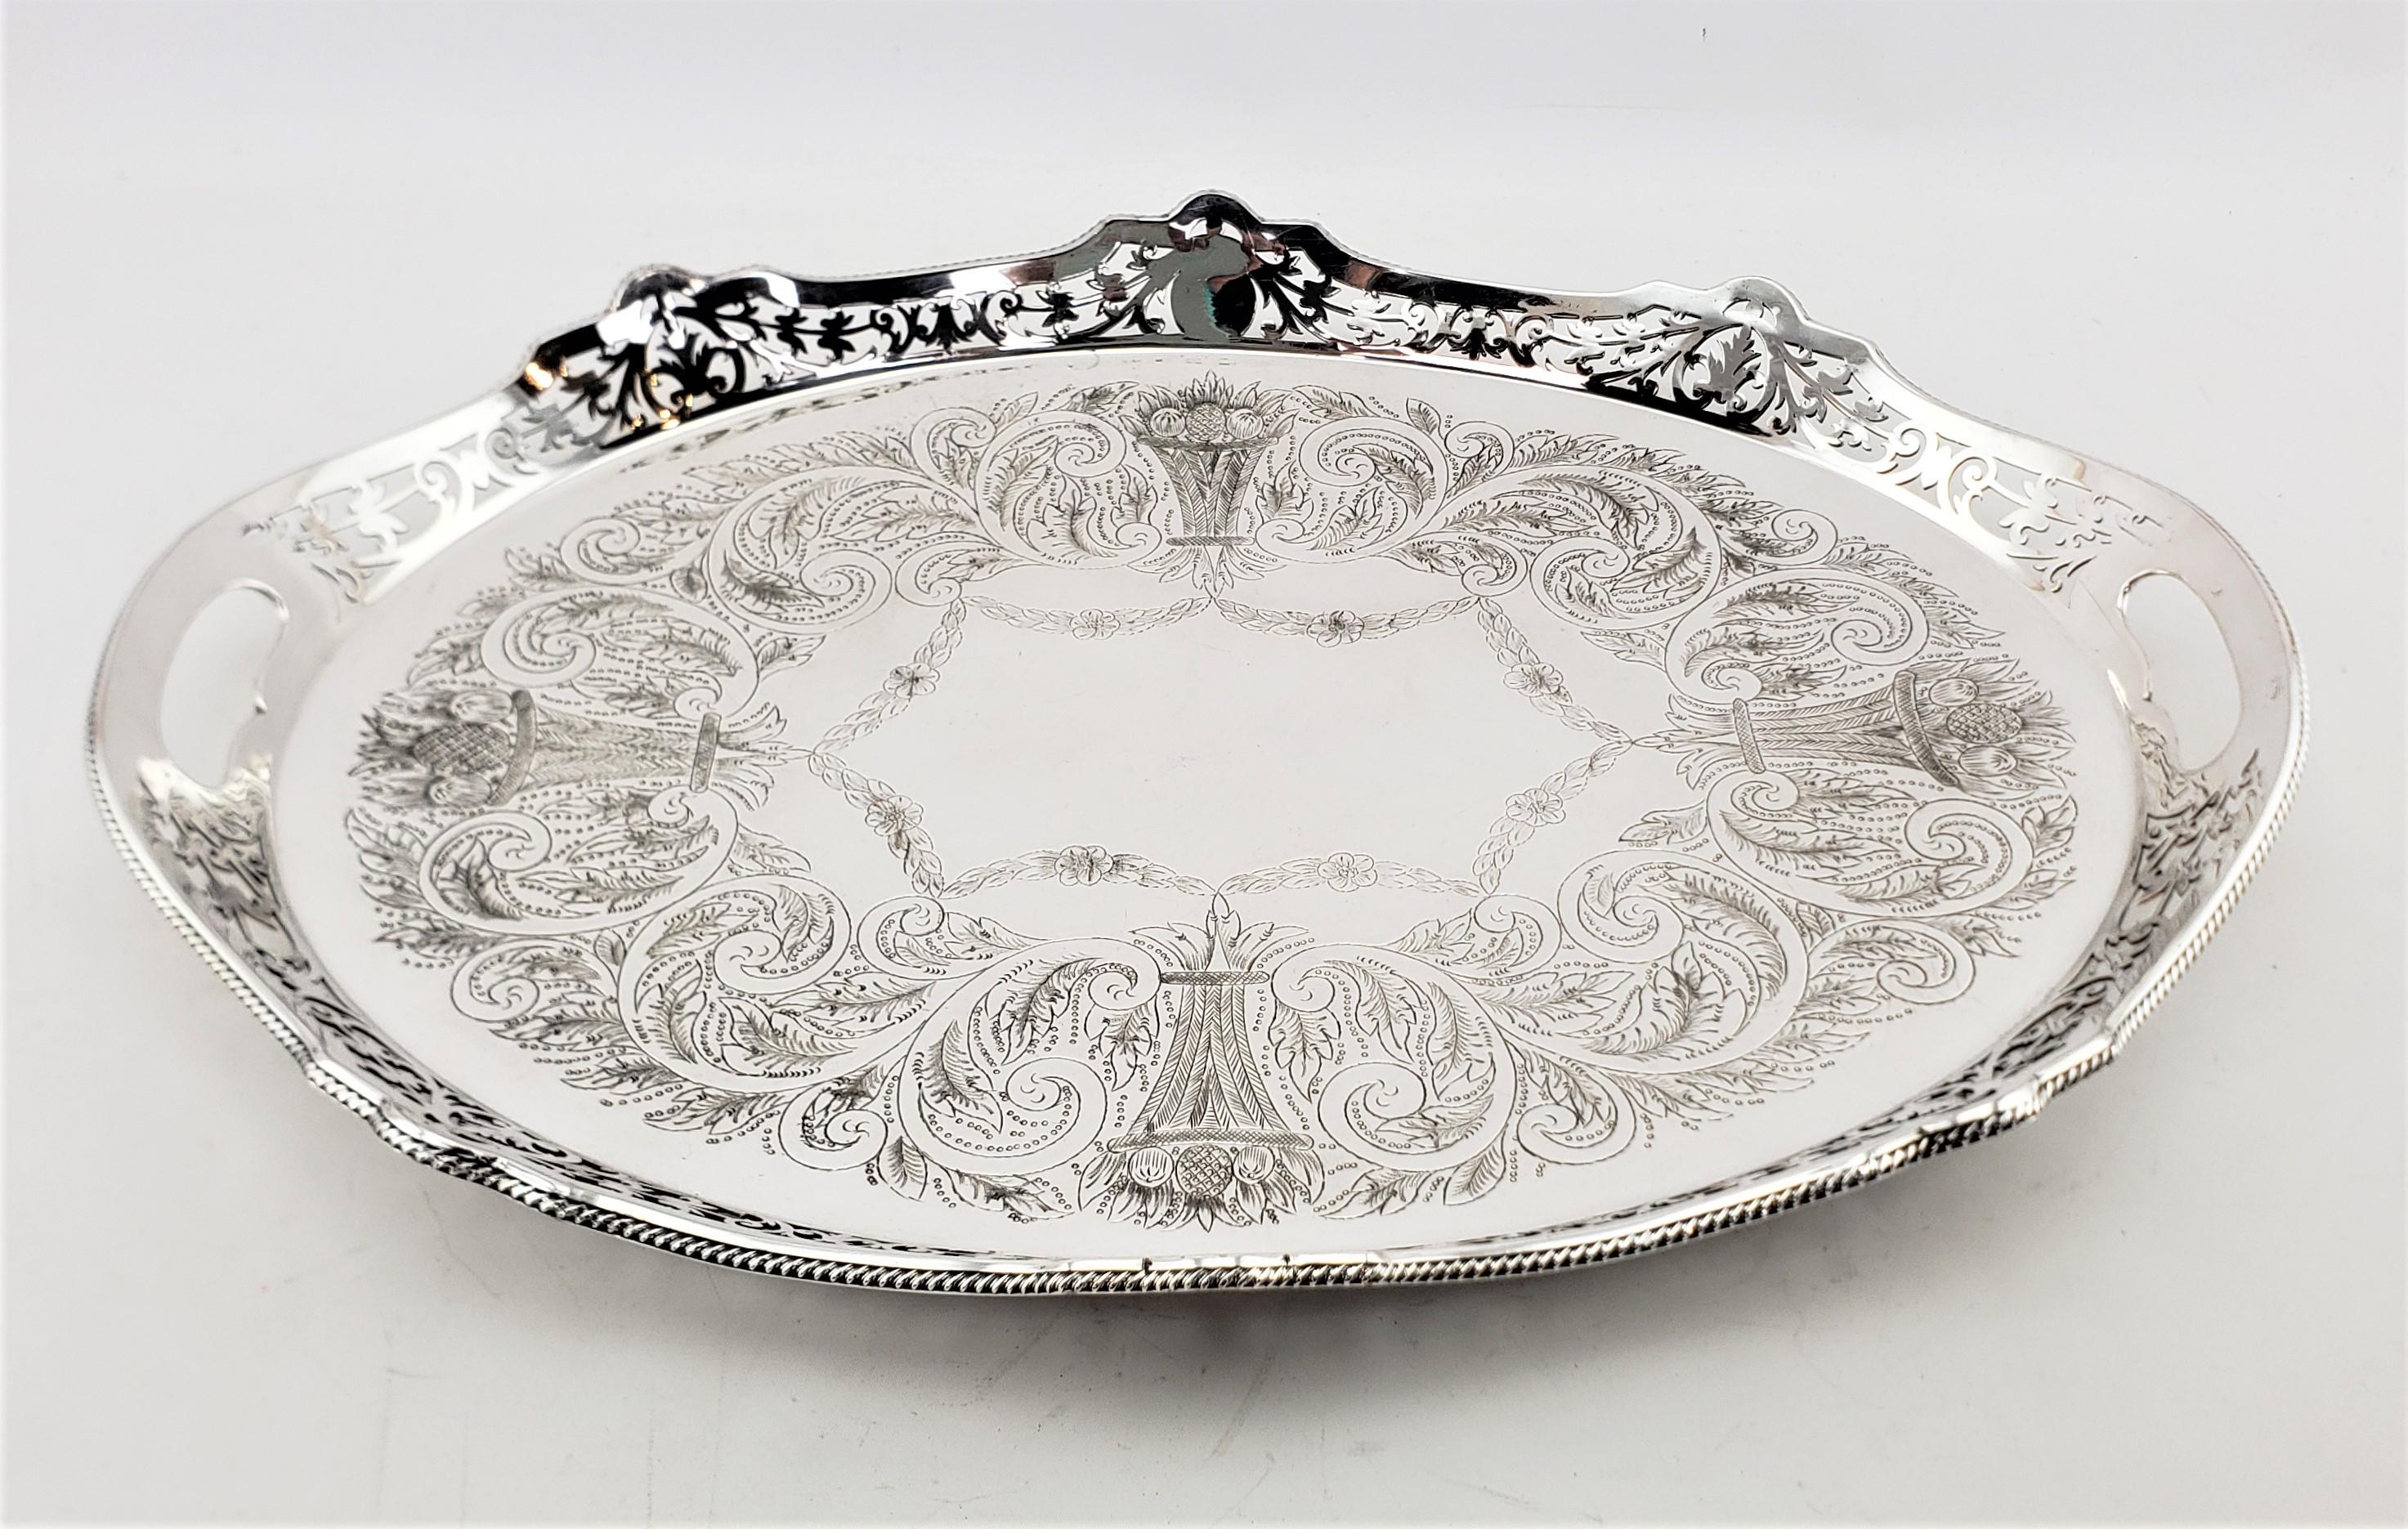 Antique Oval Silver Plated Gallery Serving Tray with Pierced Floral Decoration In Good Condition For Sale In Hamilton, Ontario